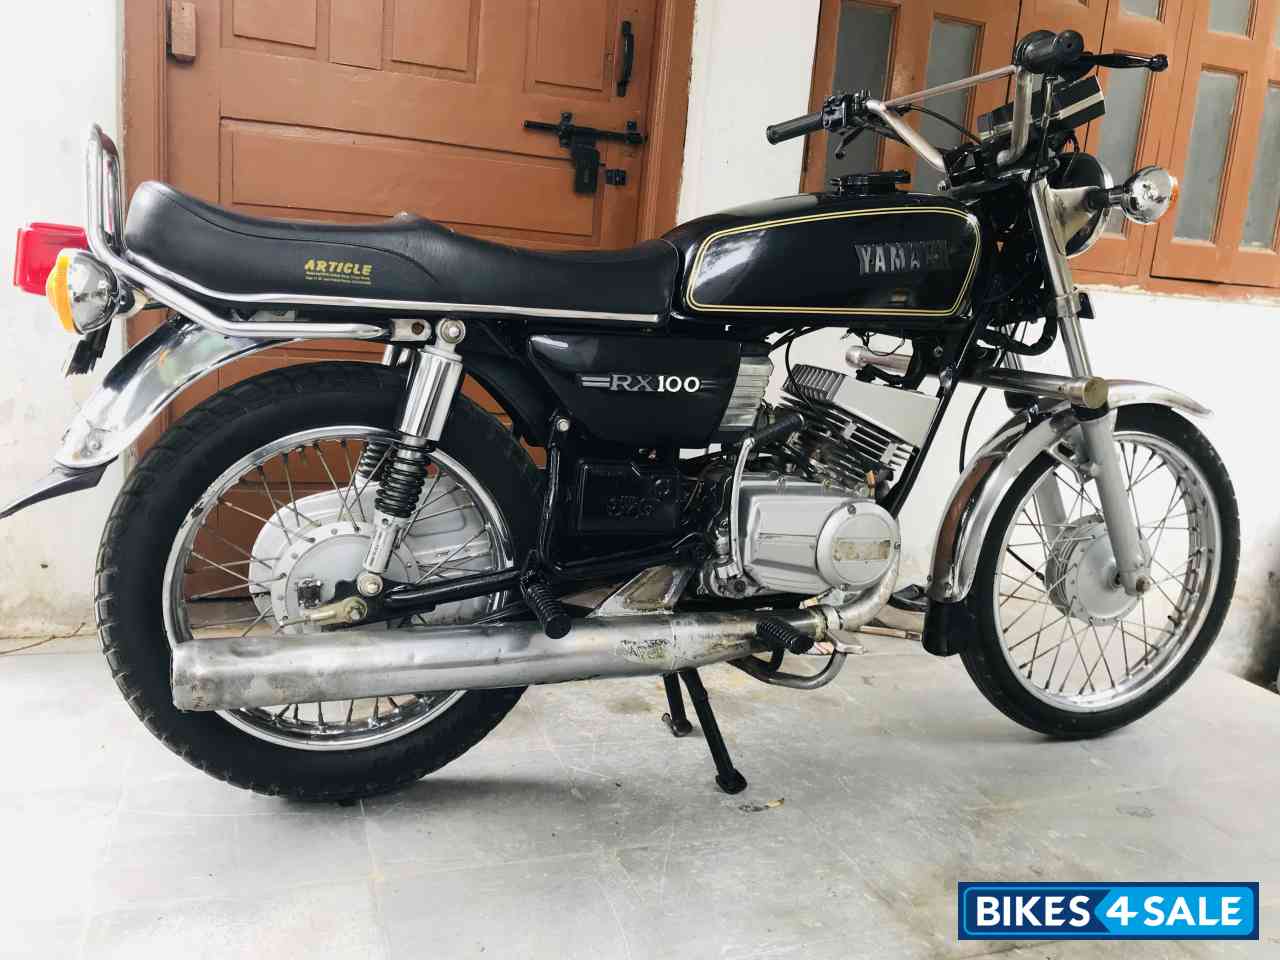 Used 1994 Model Yamaha Rx 100 For Sale In Hyderabad Id 249000